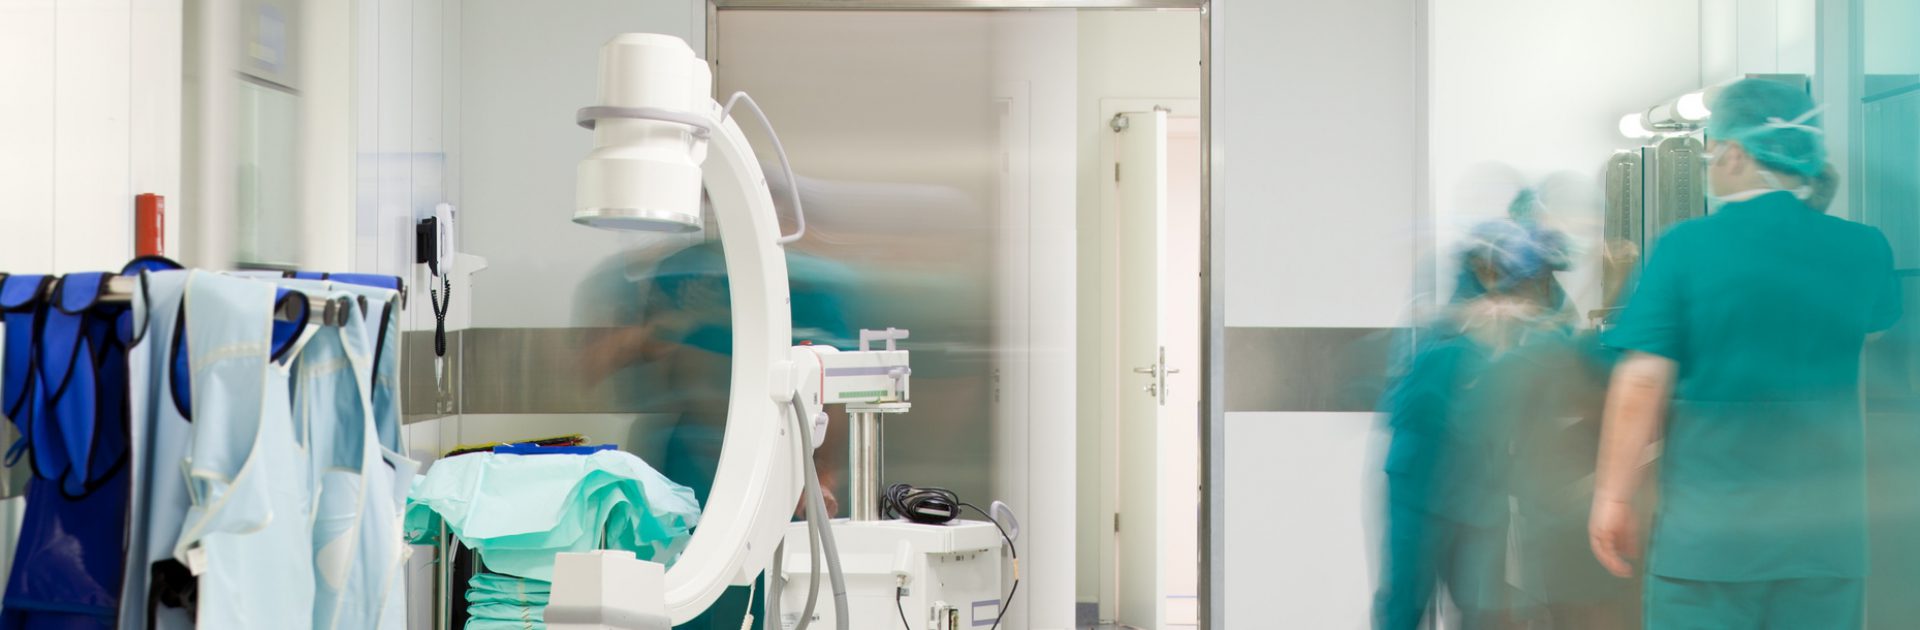 Mobile X-Ray machine in hospital corridor in front of surgery, blurred doctor figures